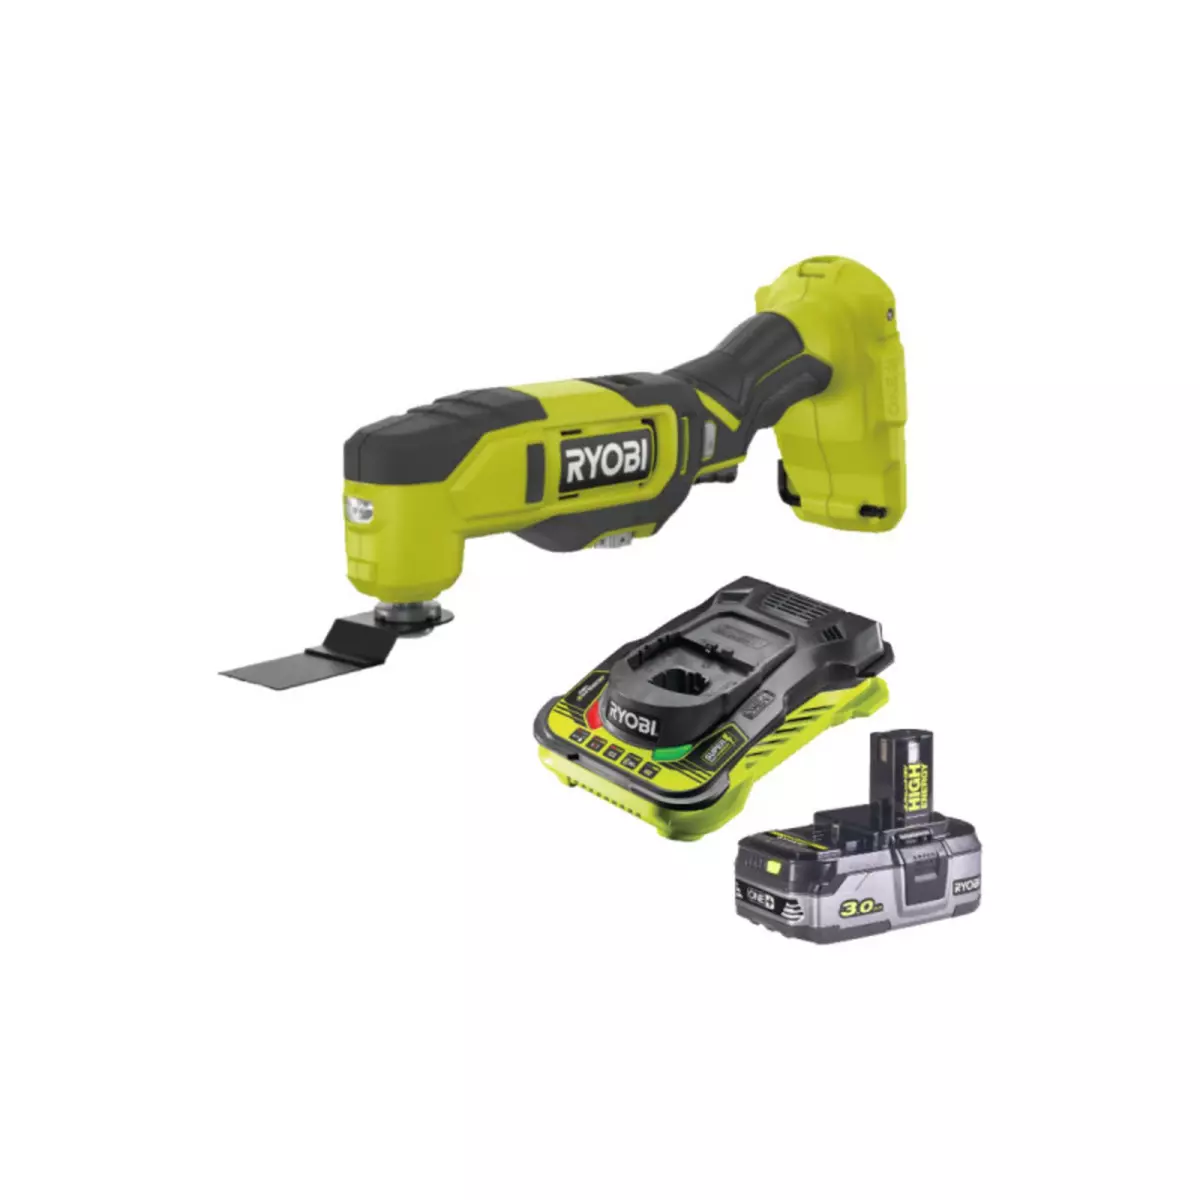  Pack RYOBI Multitool18V OnePlus RMT18-0 - 1 Batterie 3.0Ah High Energy - 1 Chargeur ultra rapide